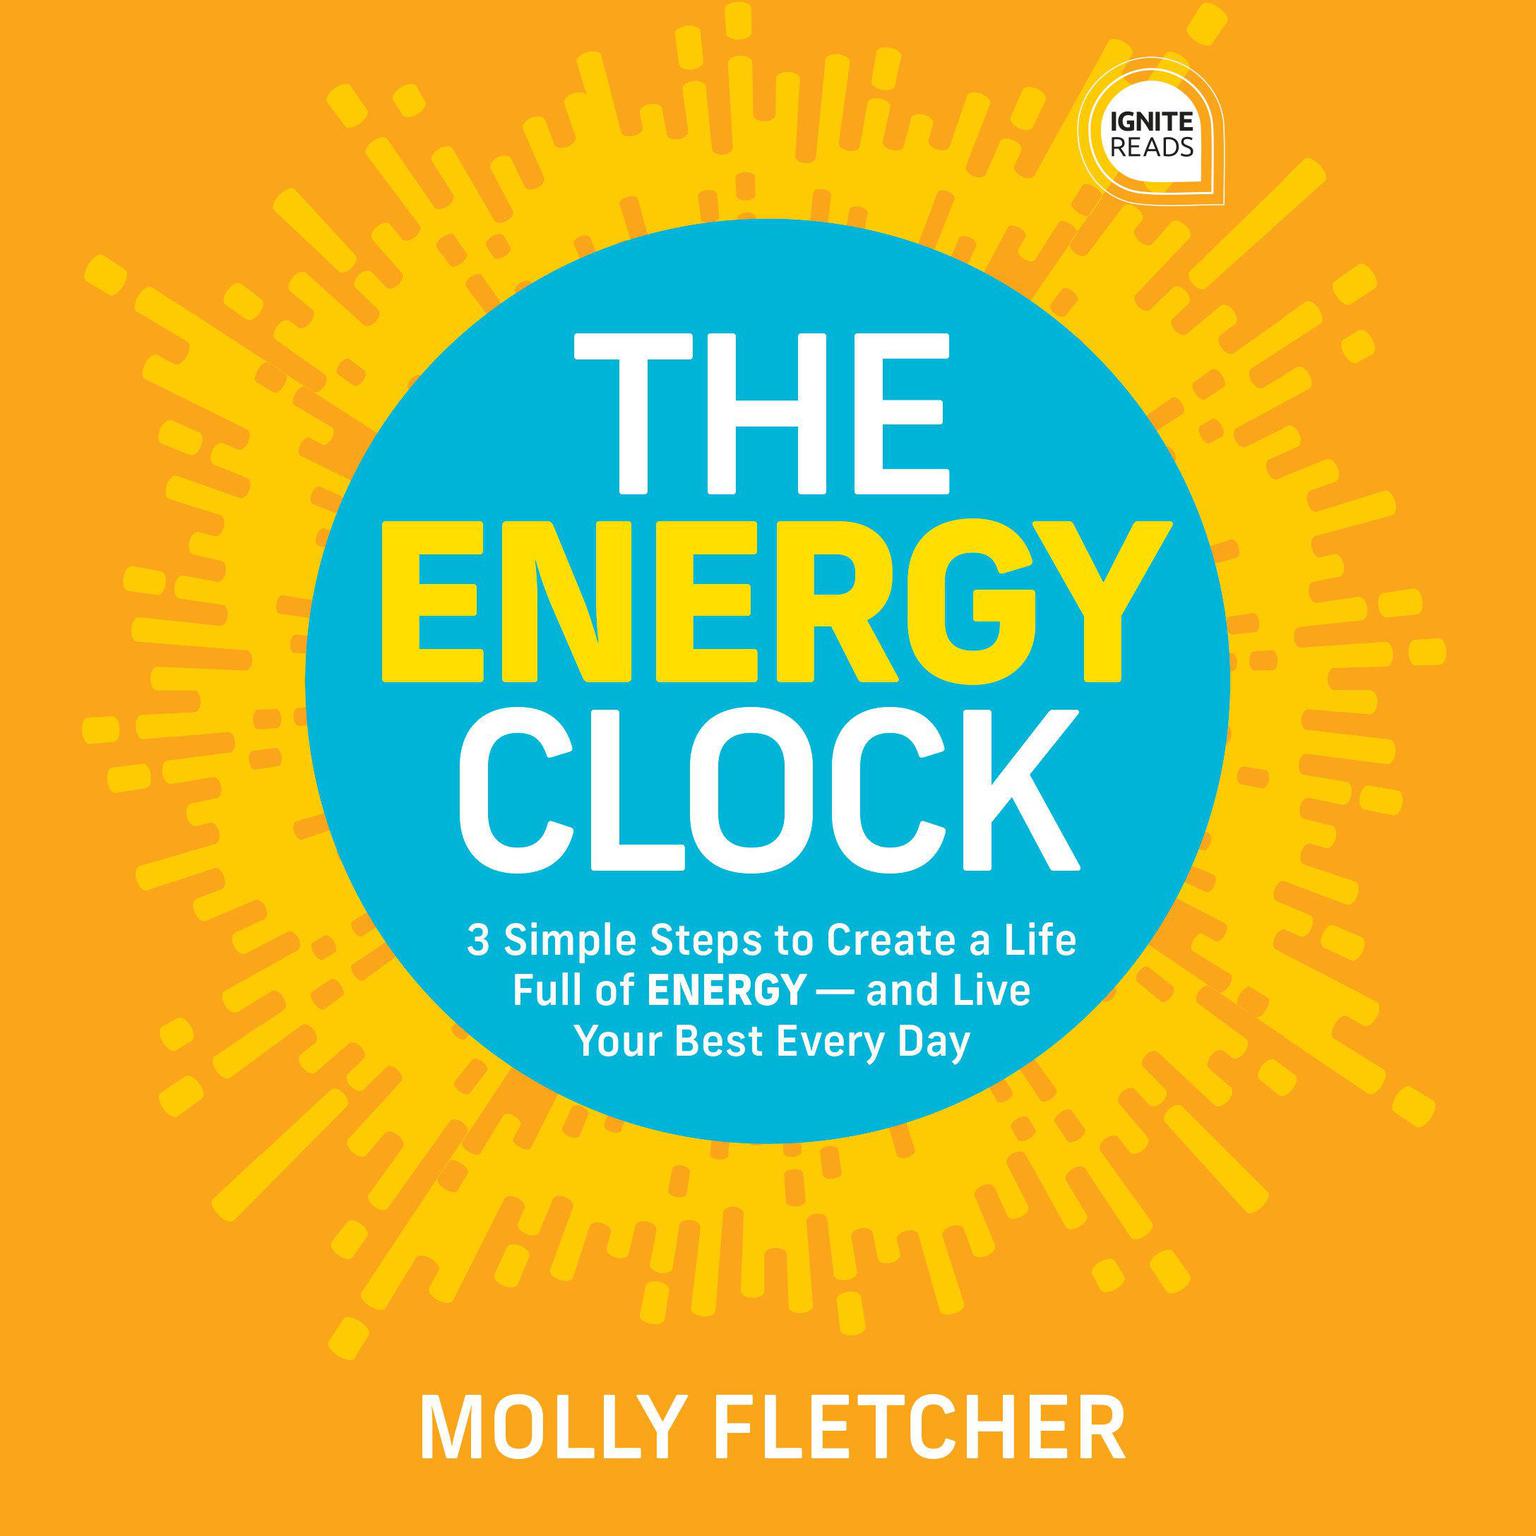 The Energy Clock: 3 Simple Steps to Create a Life Full of ENERGY - and Live Your Best Every Day Audiobook, by Molly Fletcher